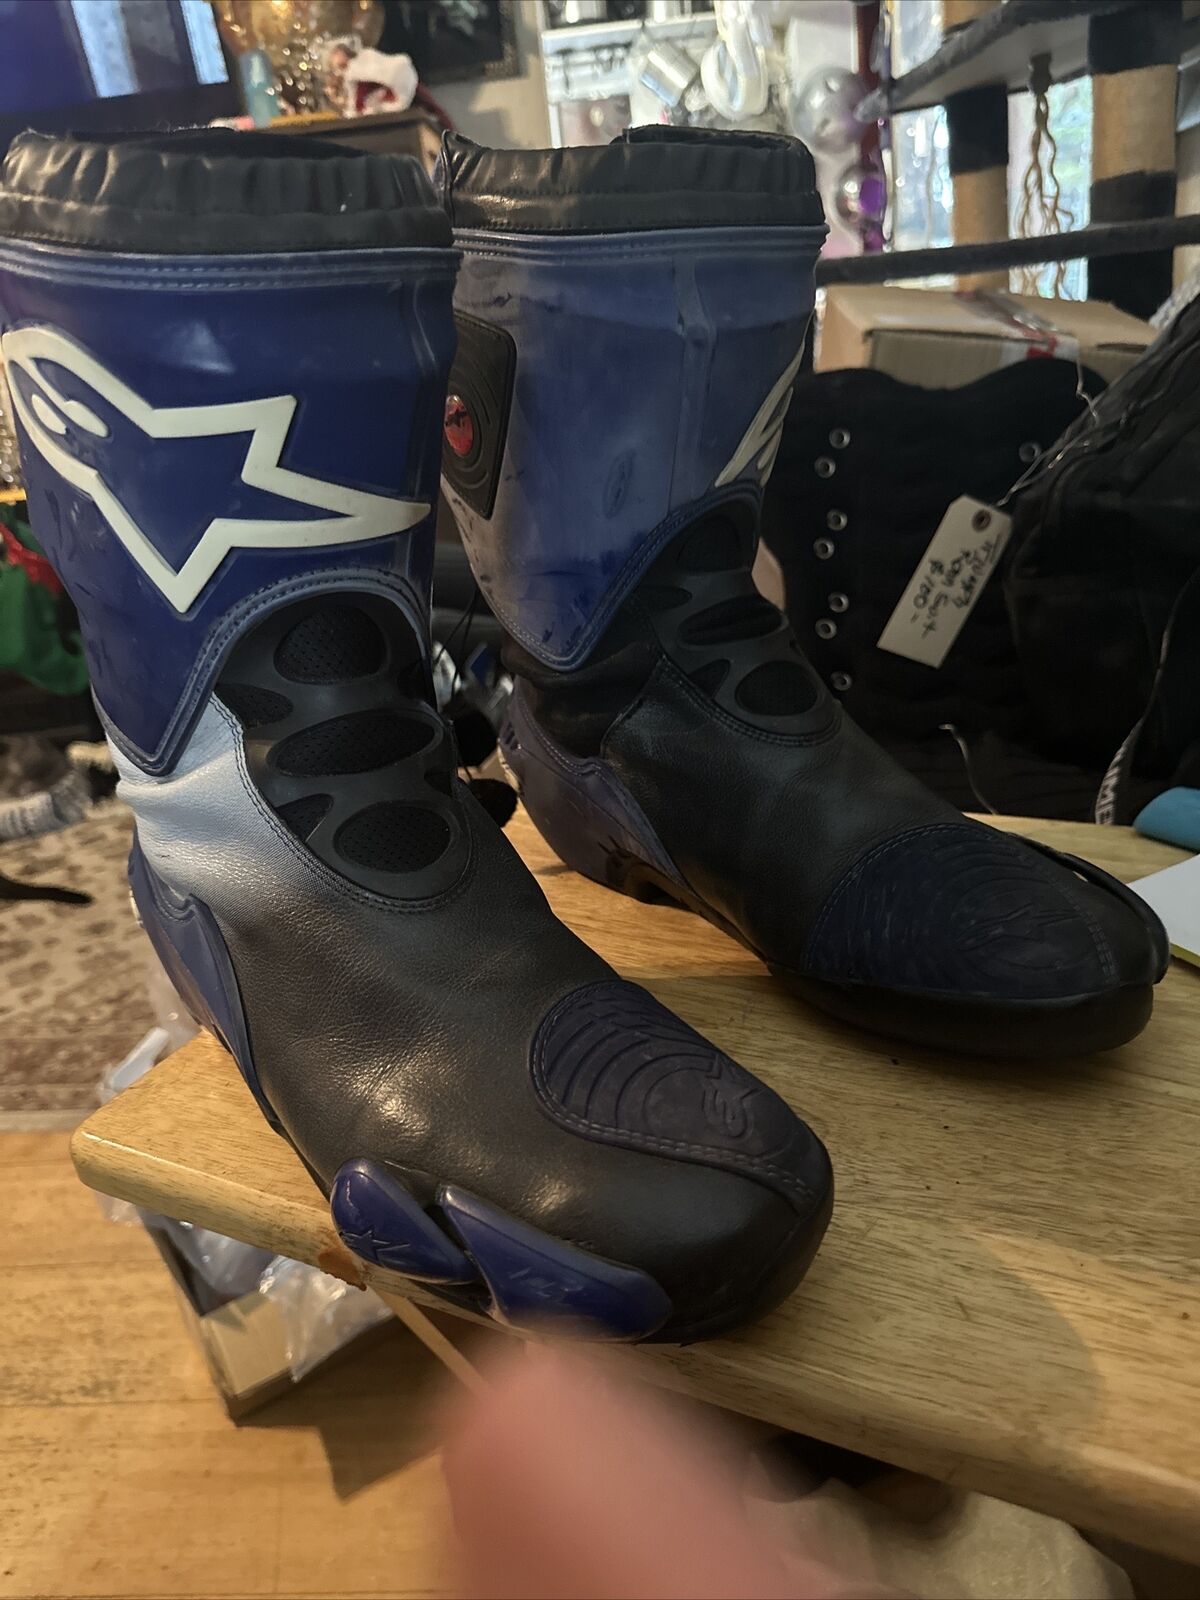 SOLD Alpinestars Leather Motorcycle Racing Boots Men's Size 12 Euro Size 47